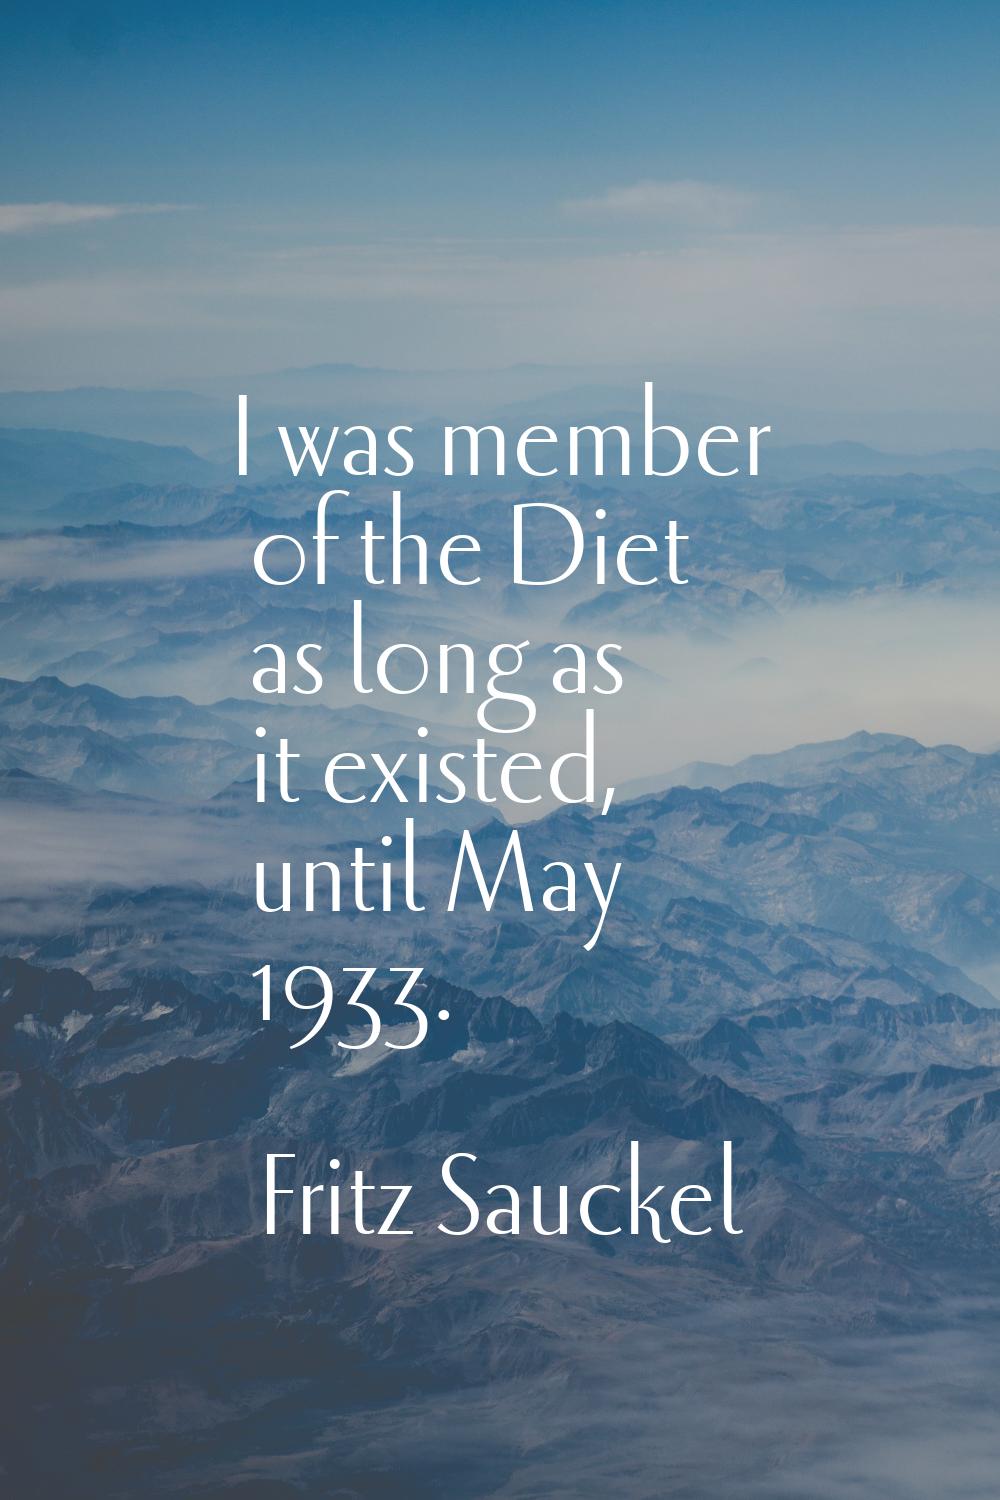 I was member of the Diet as long as it existed, until May 1933.